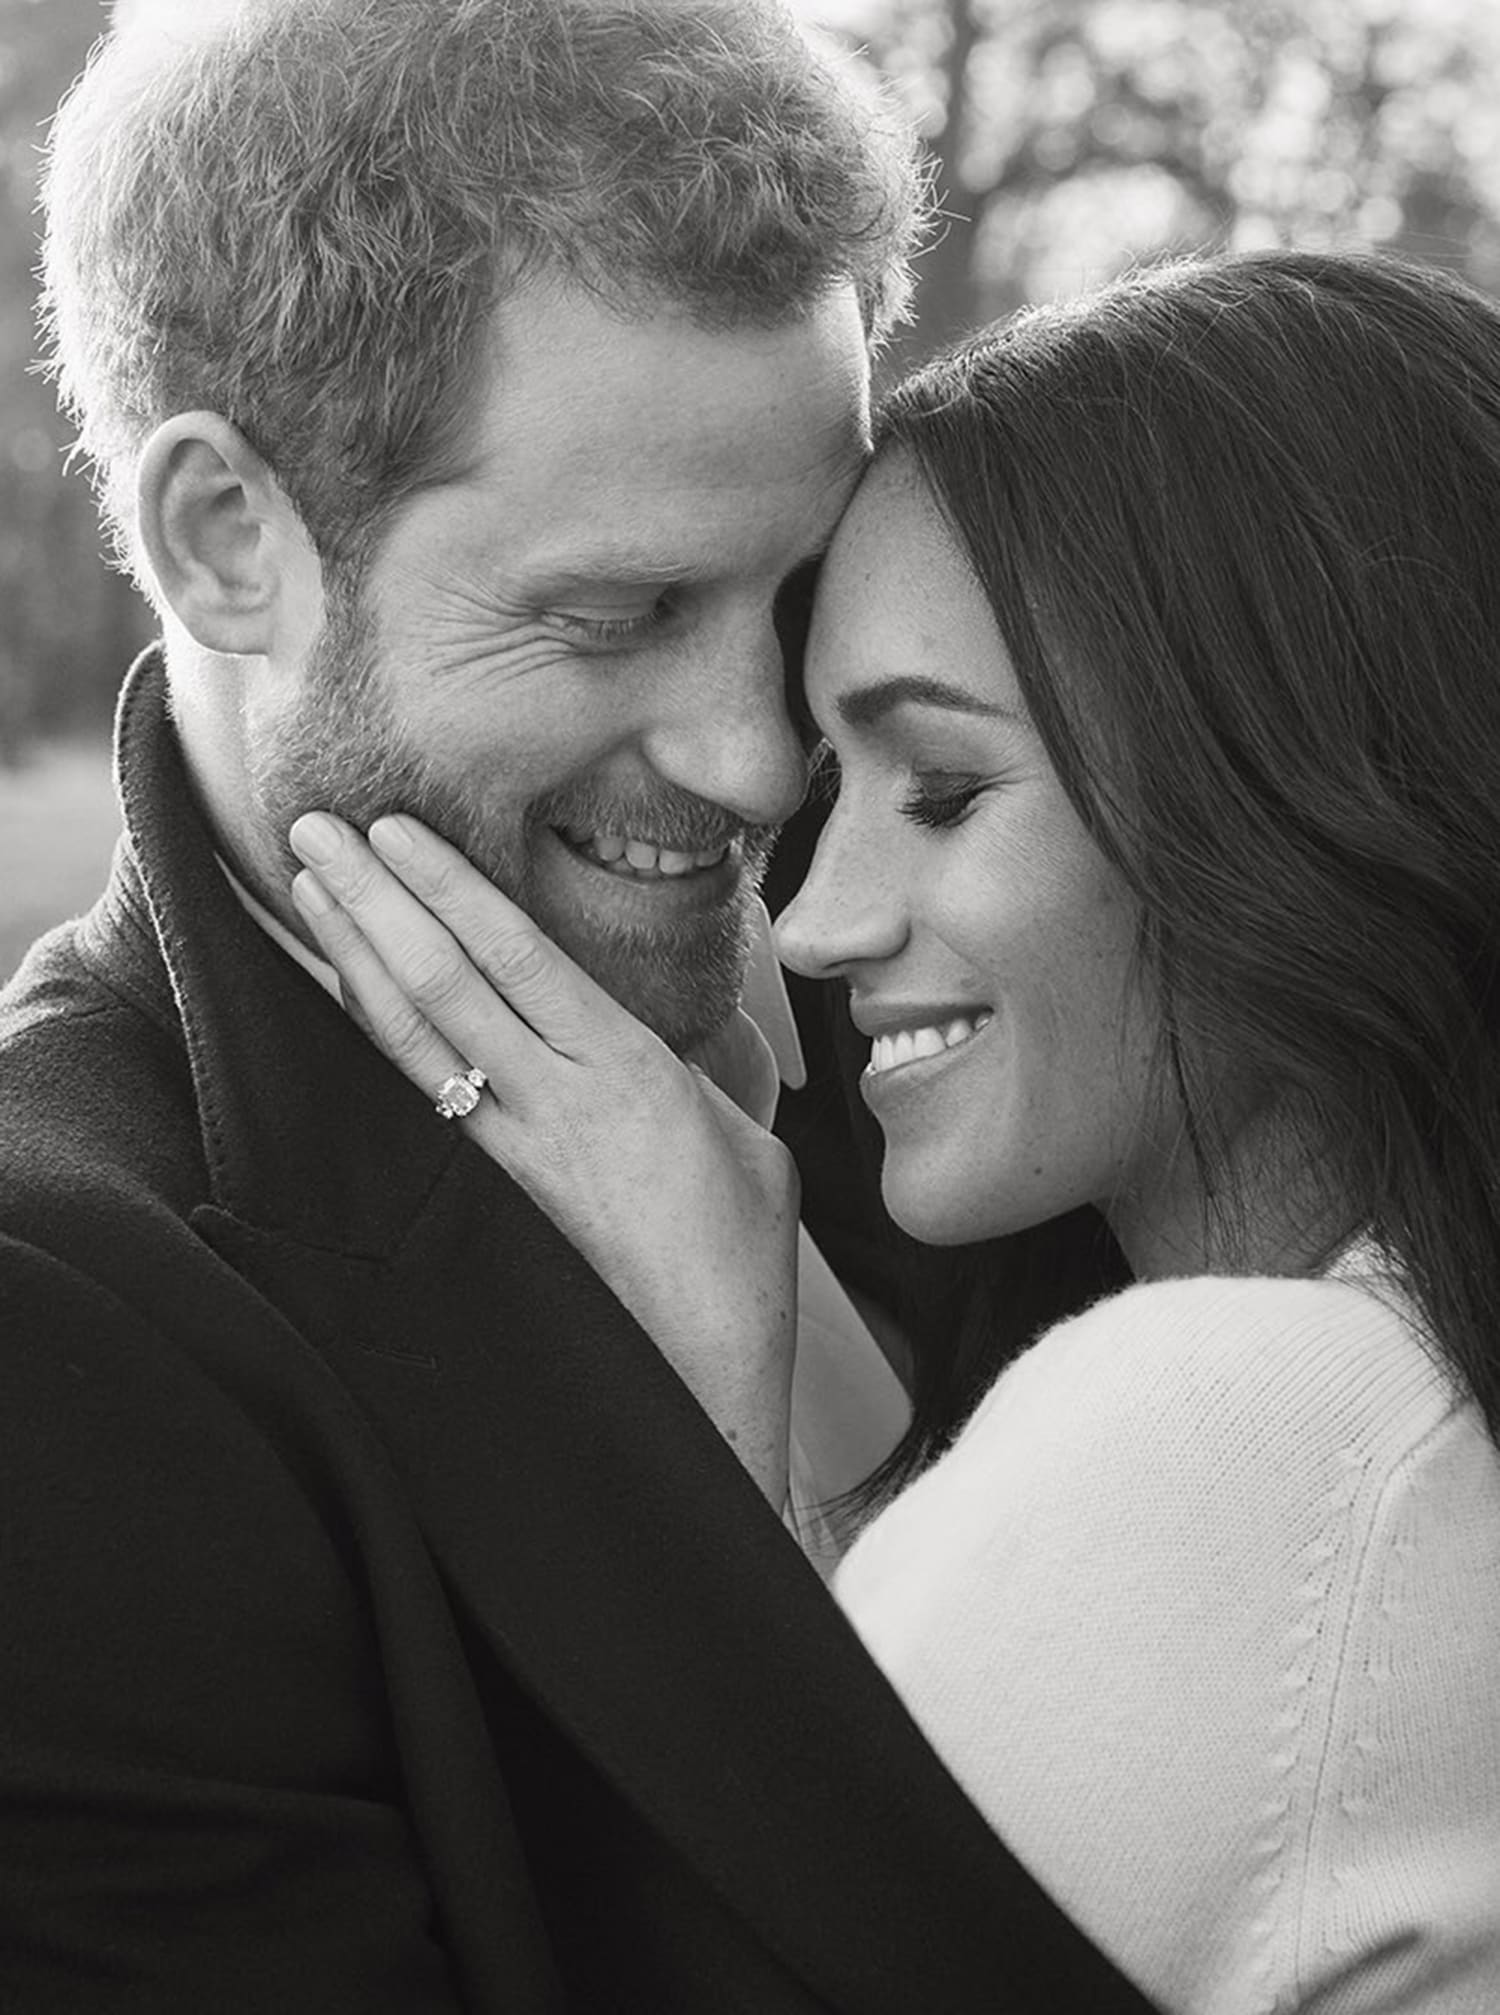 PRINCE HARRY ENGAGEMENT TO MEGHAN MARKLE A4 GLOSSY PHOTO ROYAL WEDDING #9 